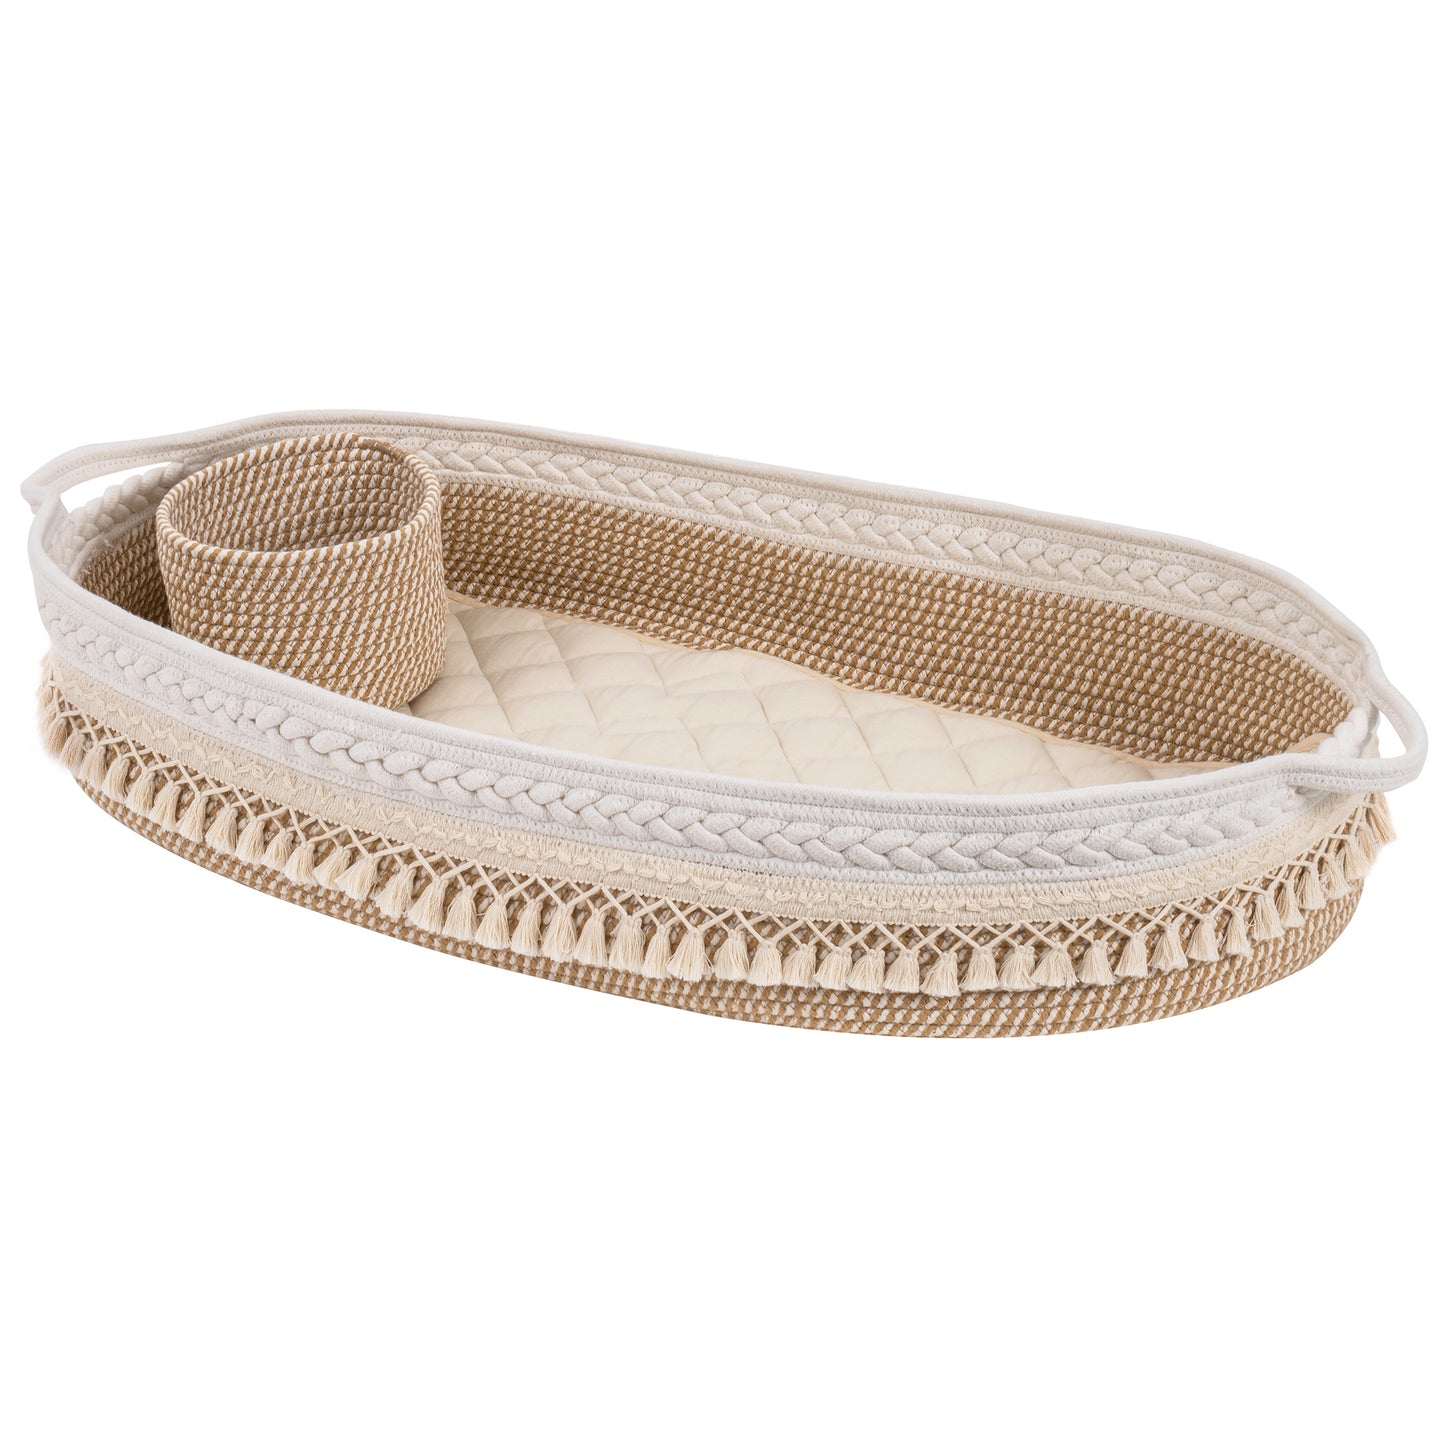 Baby Changing Basket, Handmade Woven Cotton Rope Moses Basket, Changing Table Topper with Mattress Pad (Beige&Brown)